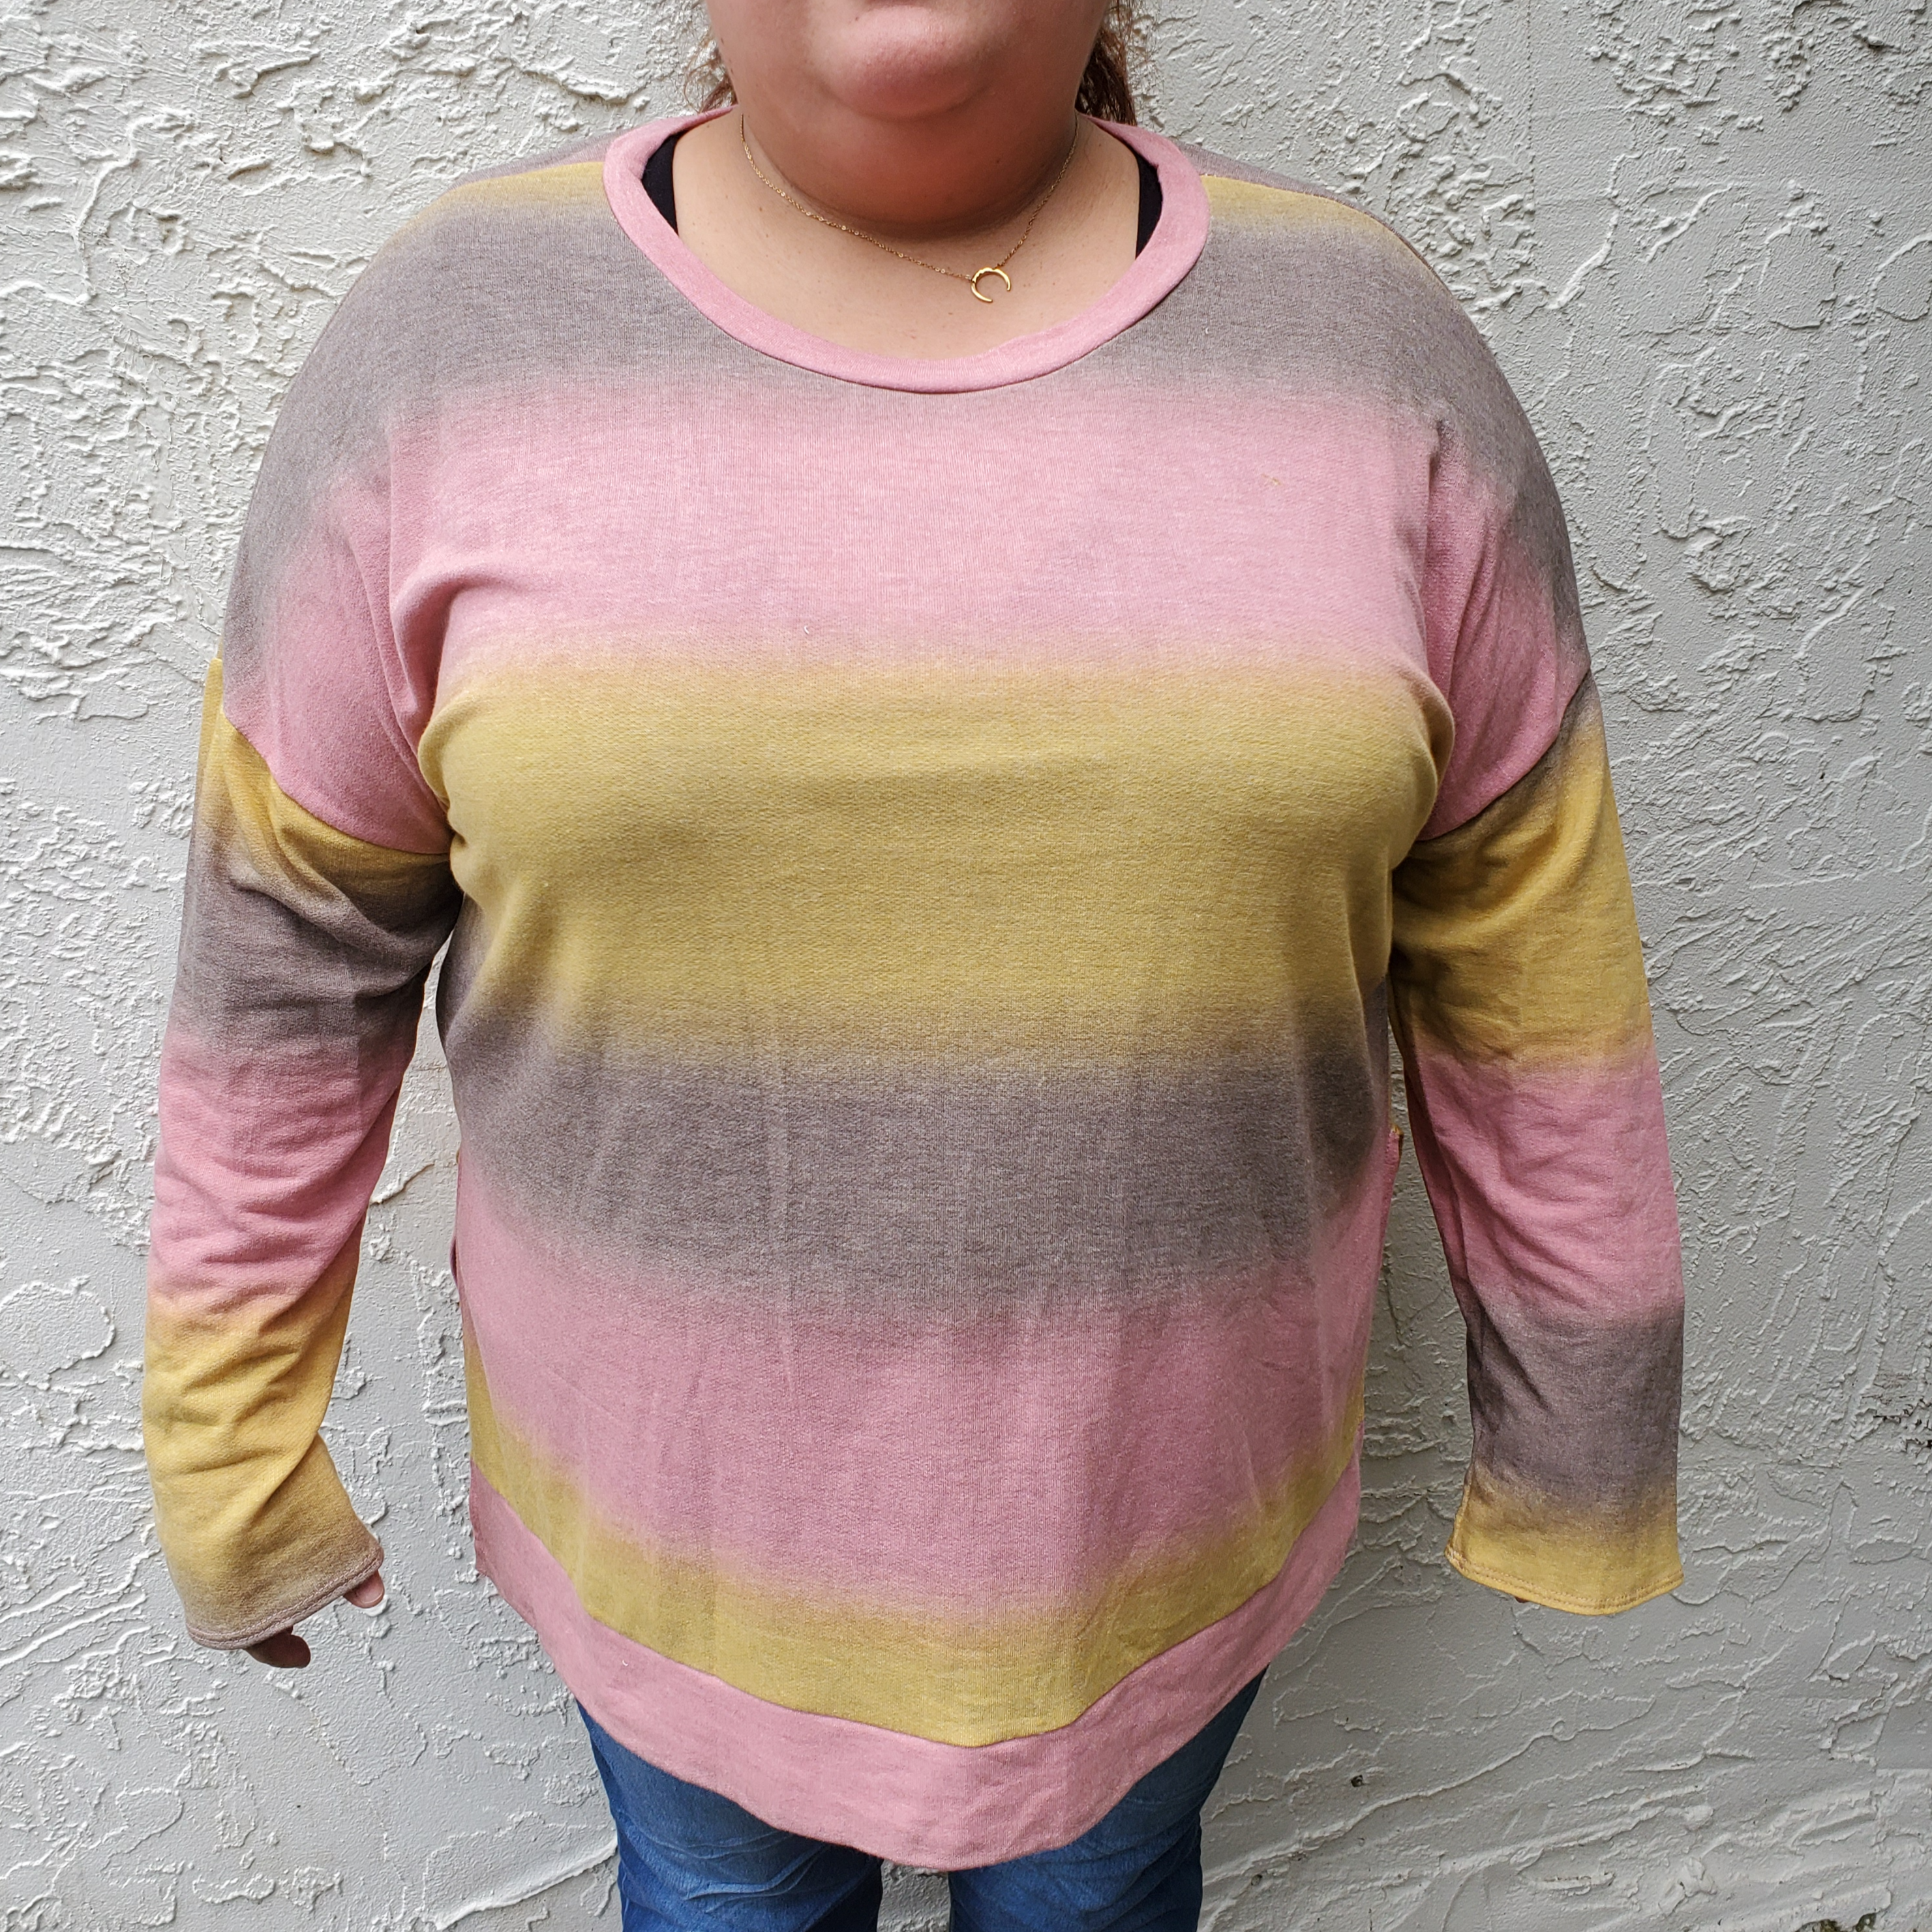 Plus Size Ombre Sweater